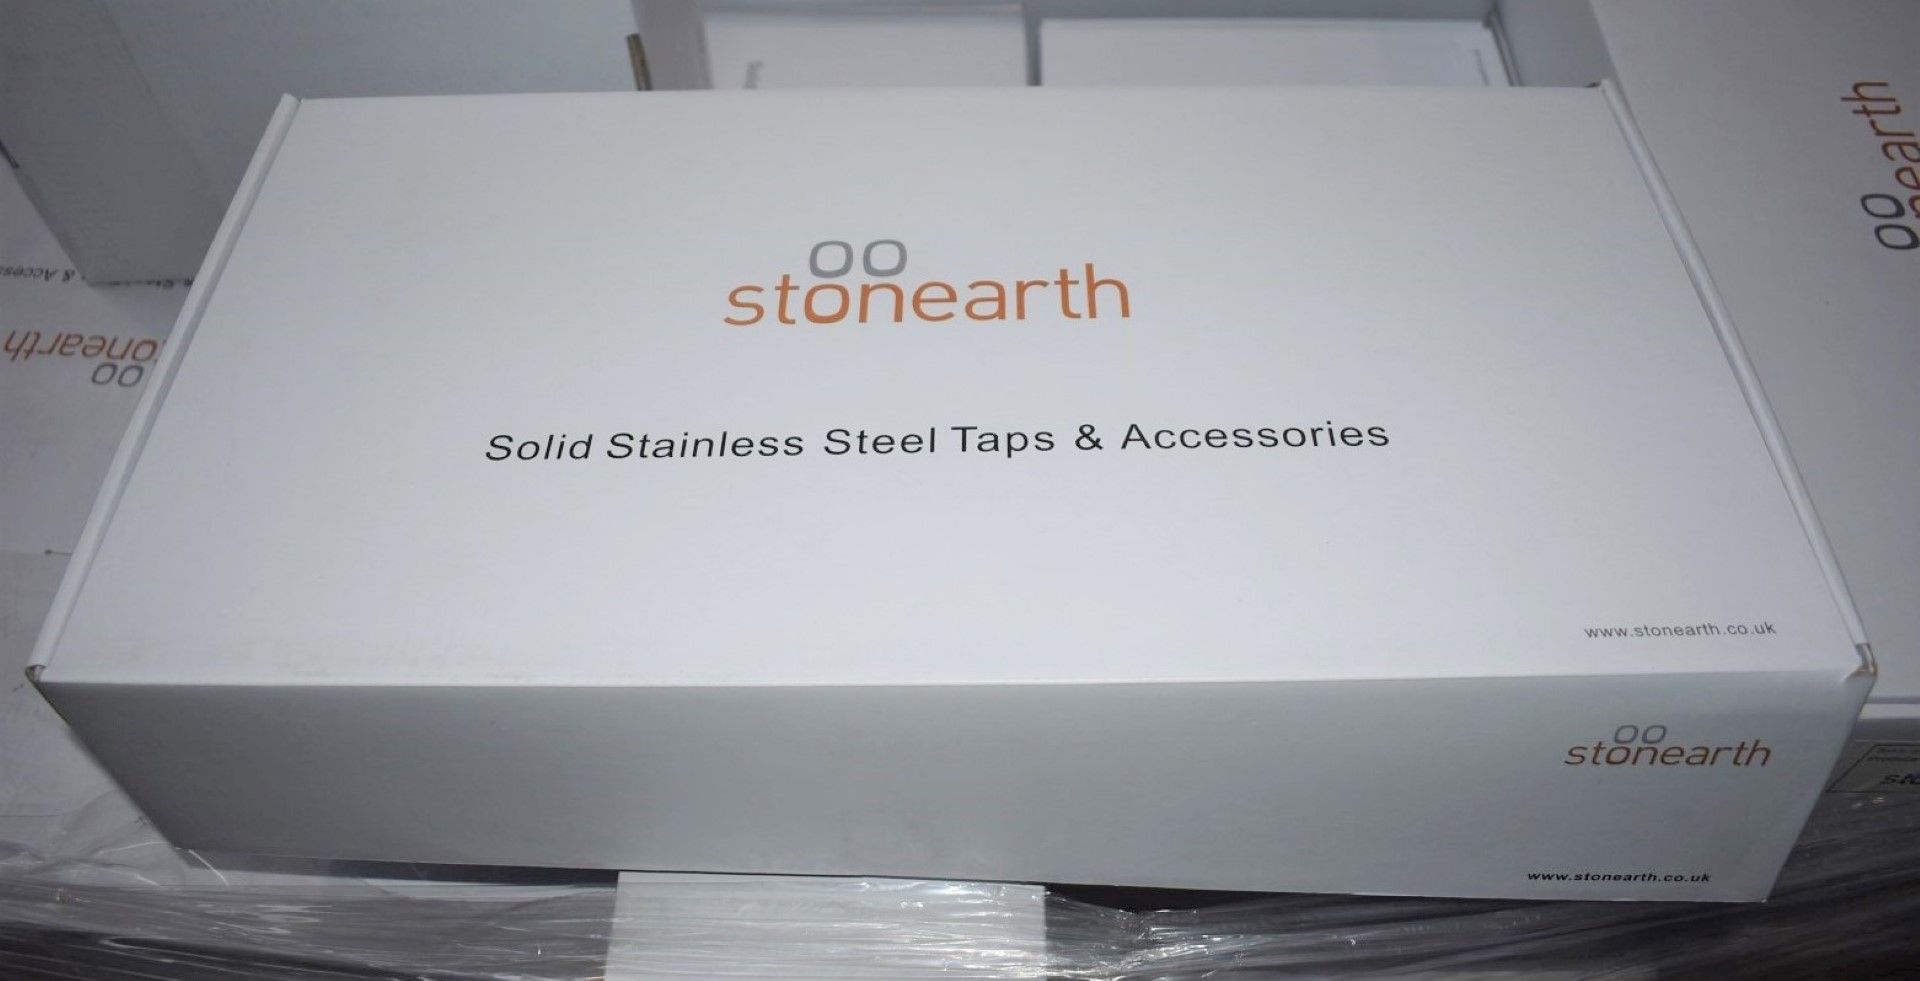 1 x Stonearth Bath Waste Kit With Stainless Steel Covers - Brand New & Boxed - RRP £125 - Ref: TP893 - Image 2 of 7